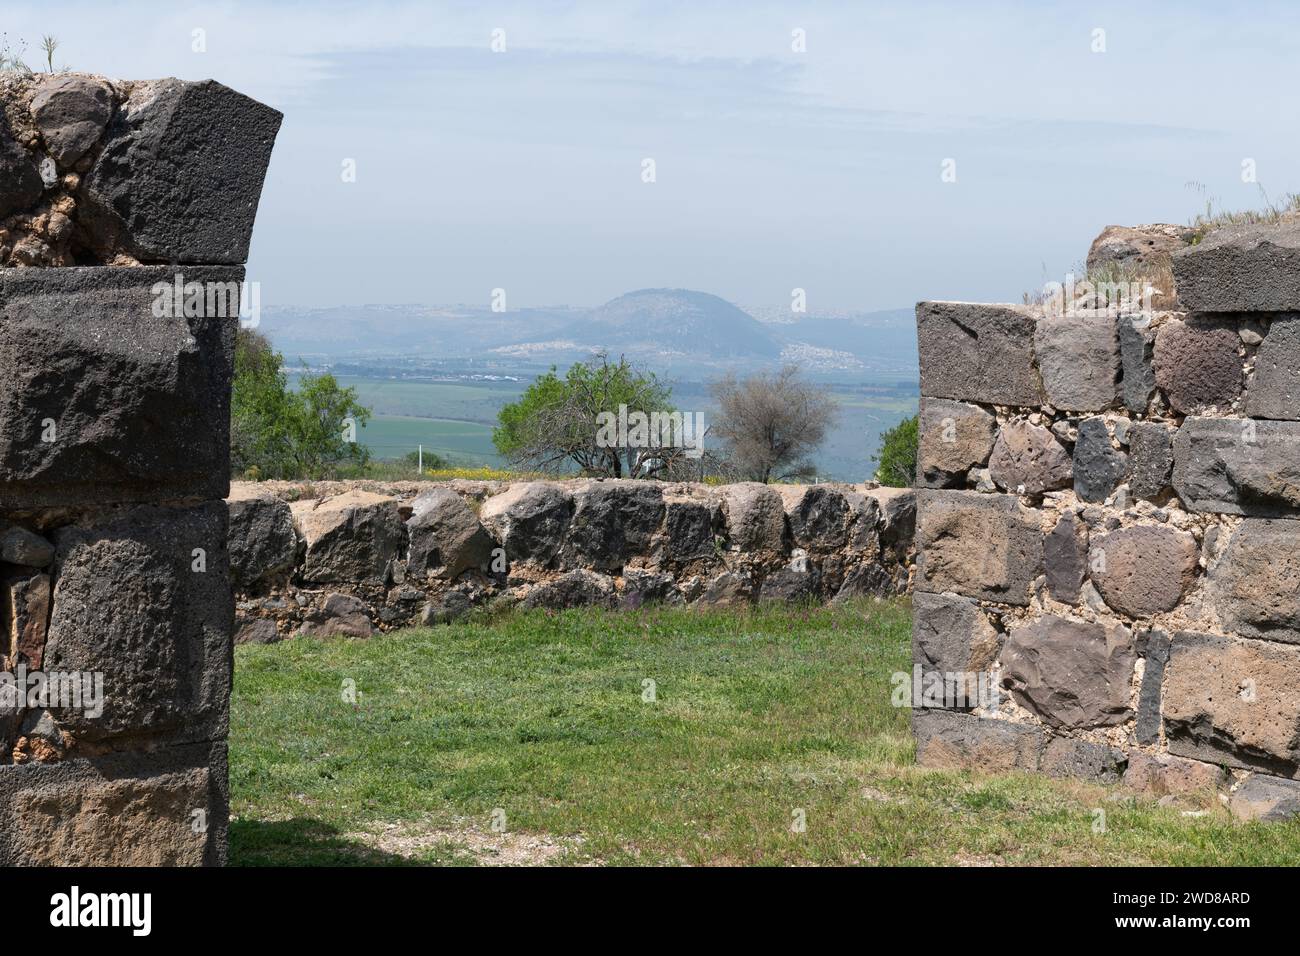 Section of the restored basalt stone wall of the Belvoir Crusader Castle in northern Israel's Galilee region. Stock Photo